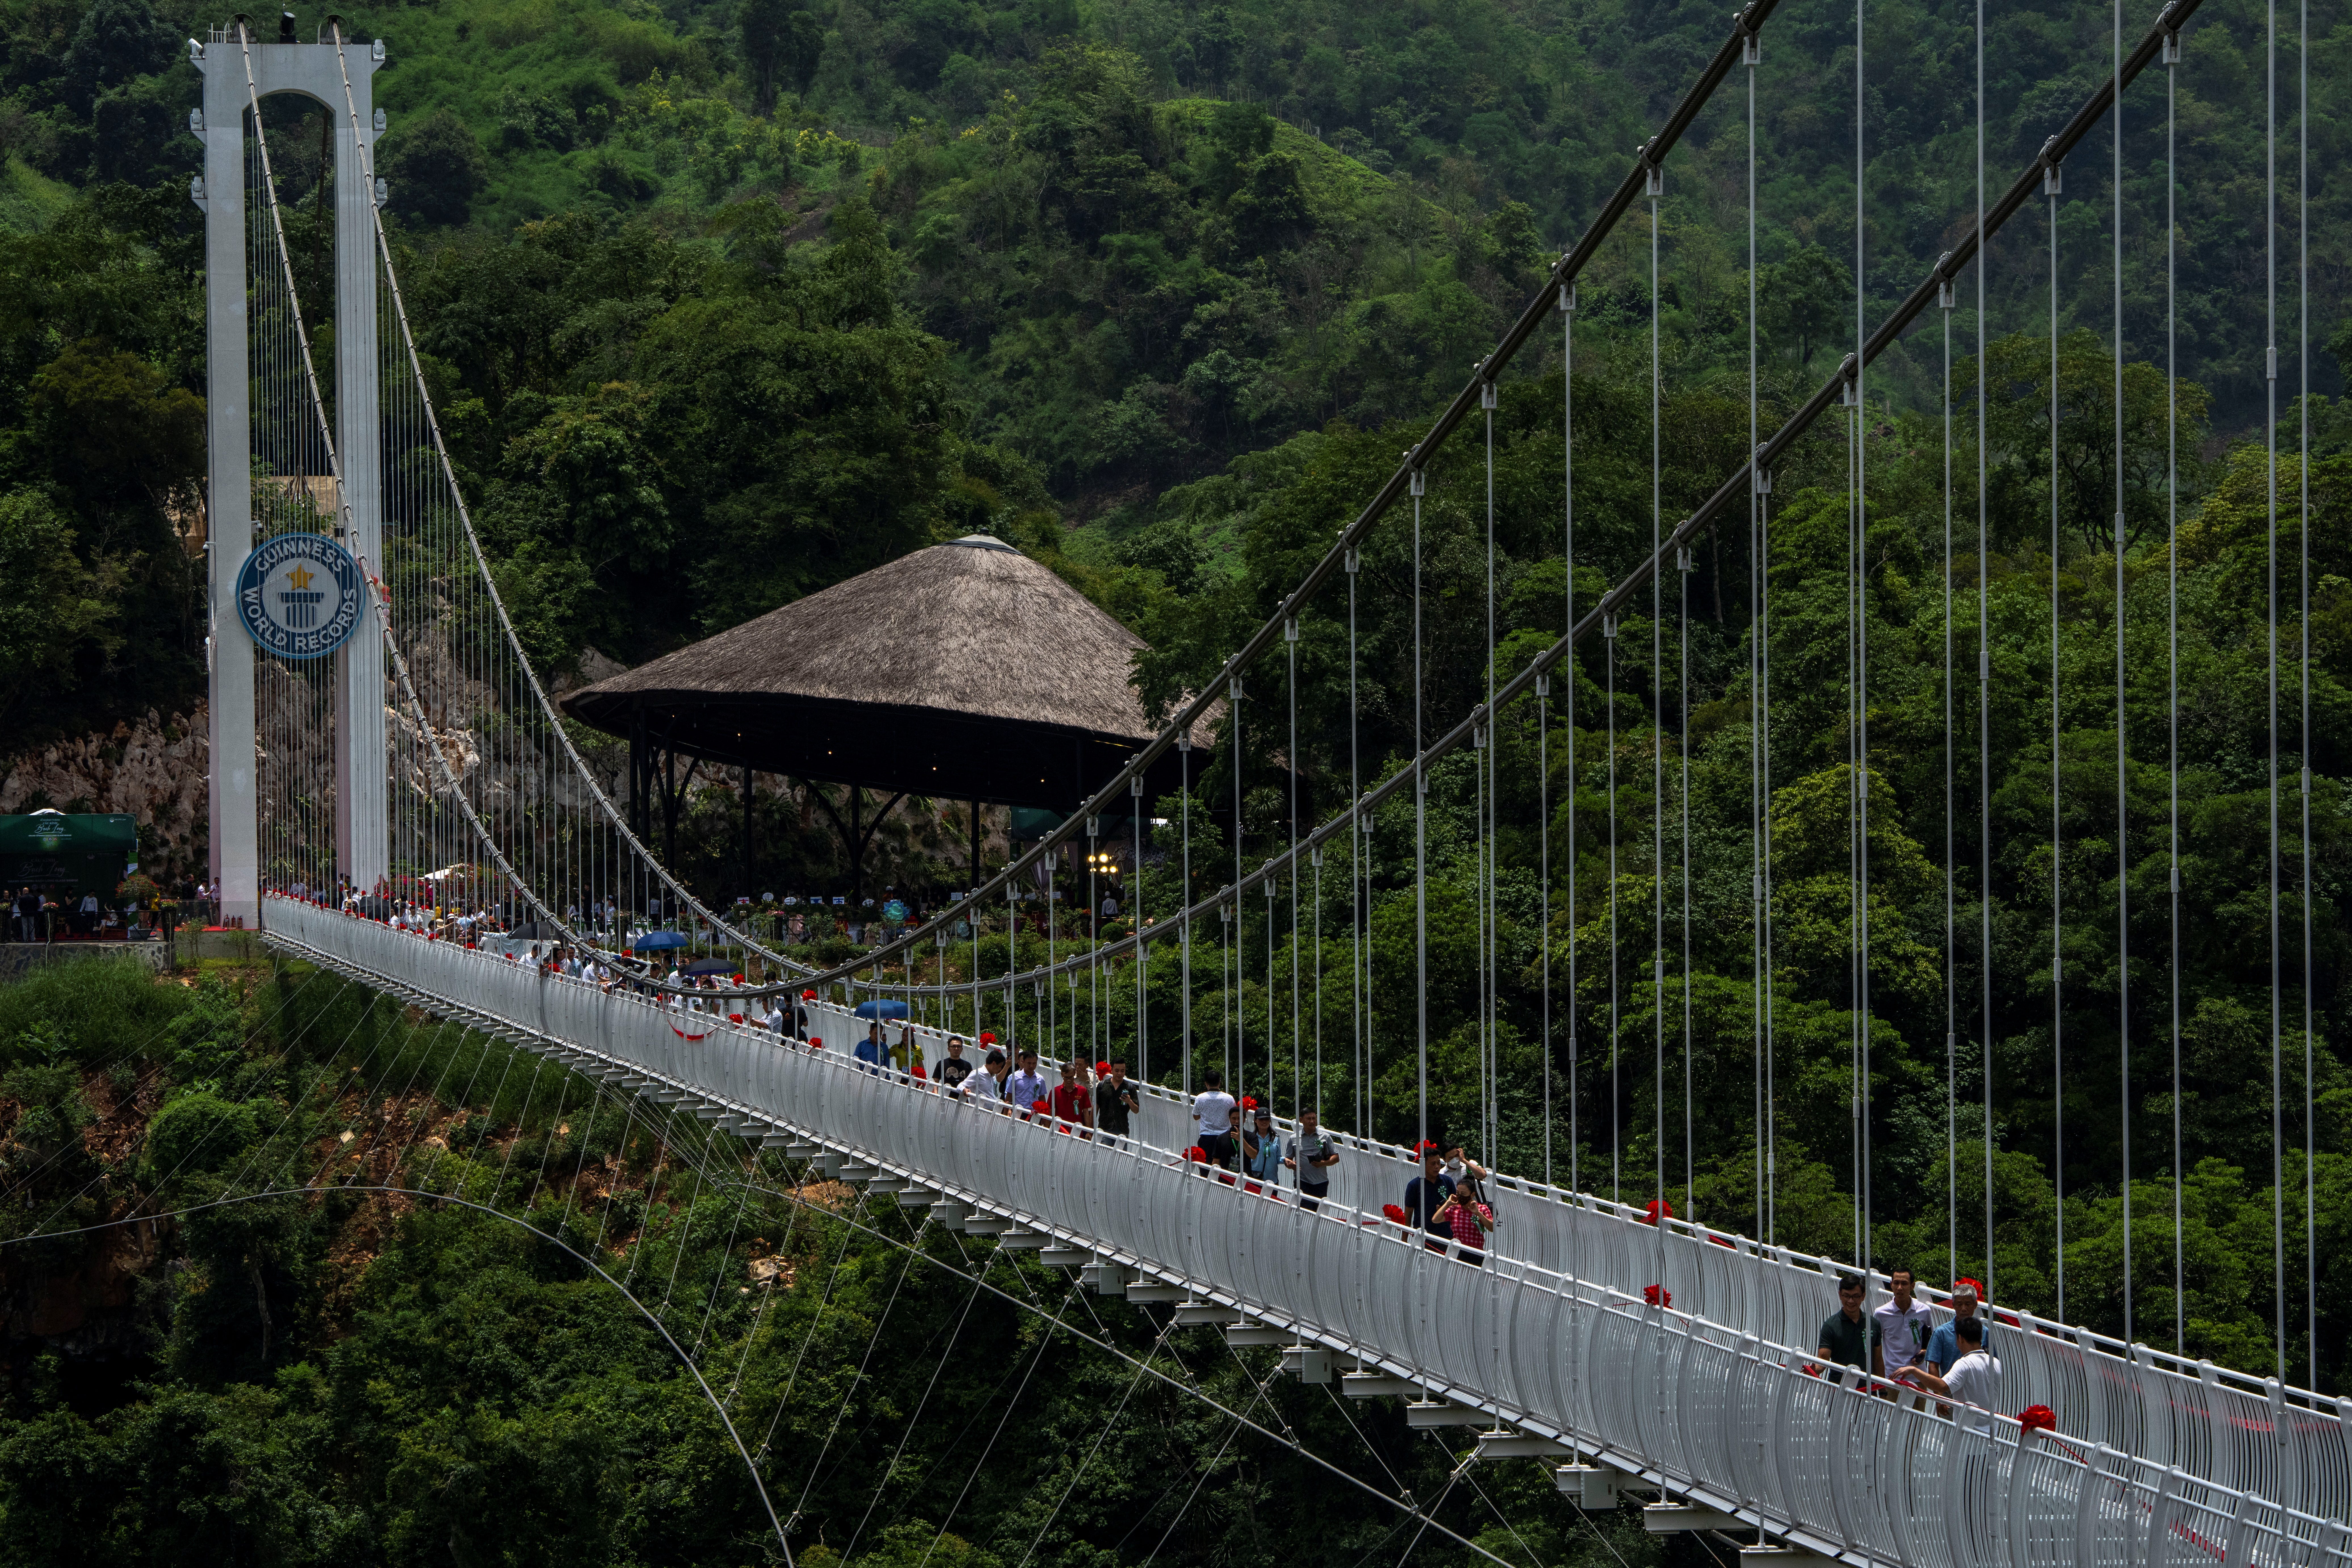 People walk on the Bach Long glass bridge during the opening ceremony at Moc Chau district in Son La province, Vietnam, May 28, 2022.